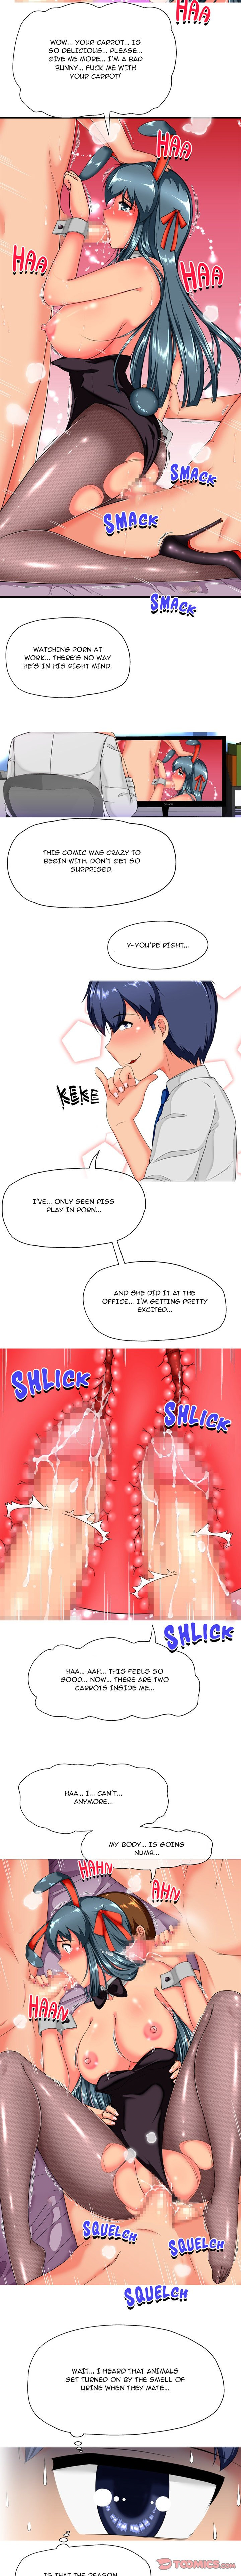 A Tale of Tails - Chapter 8 Page 7